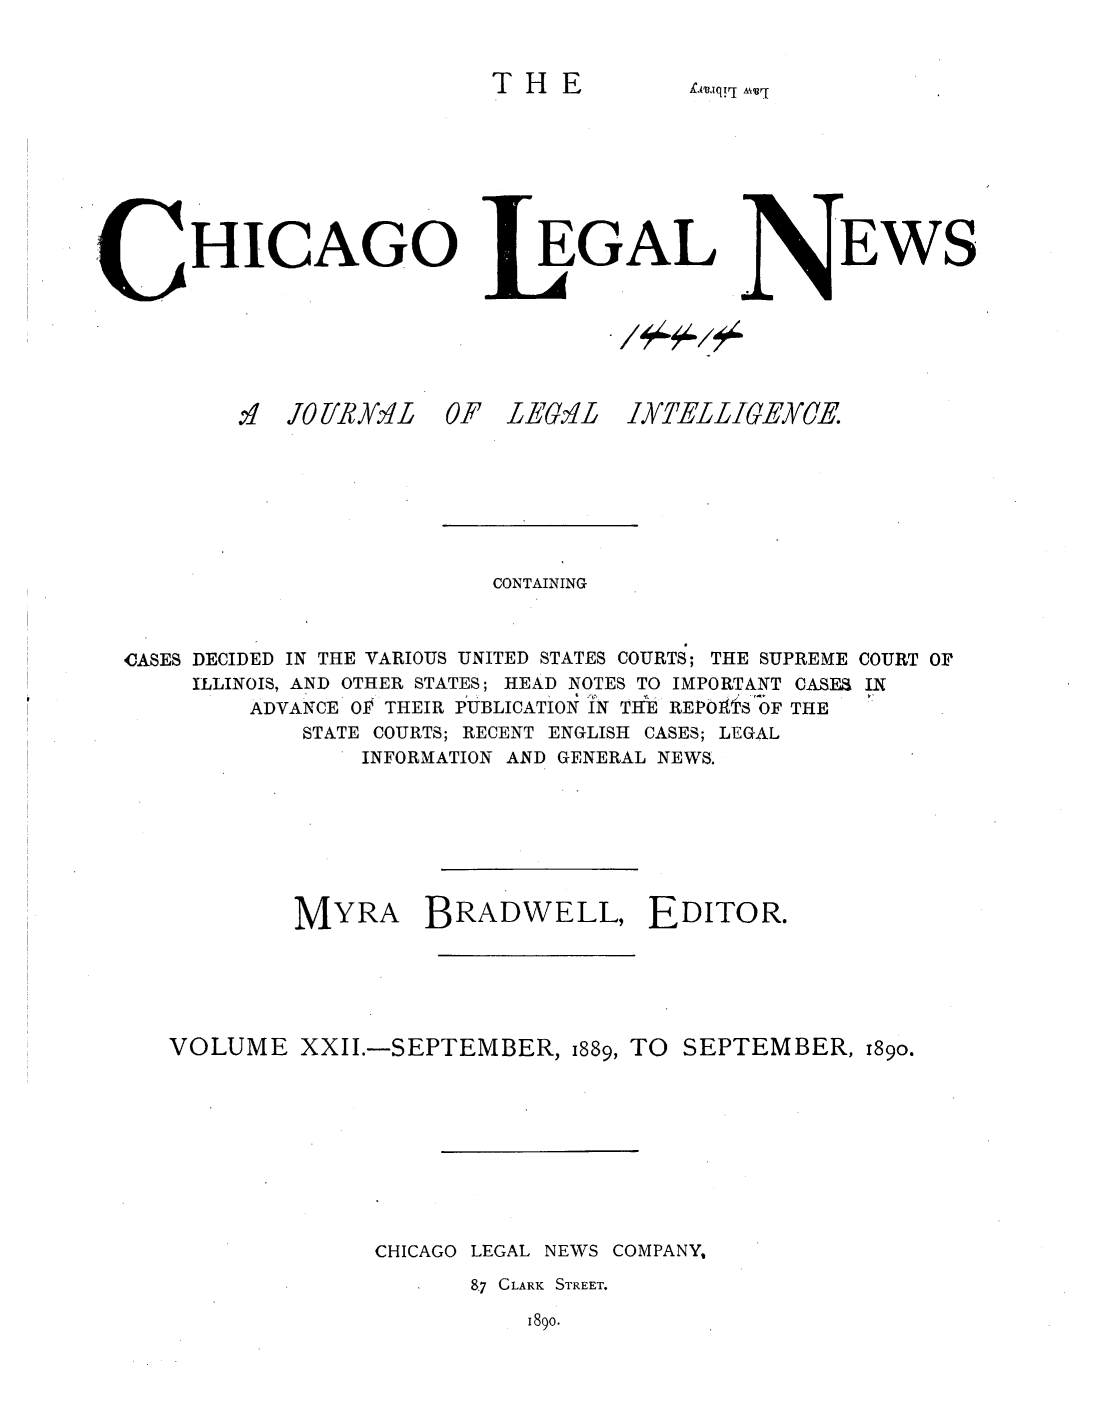 handle is hein.journals/chiclene22 and id is 1 raw text is: THEXitsuiq!rj AvvrHICAGOEGALEWSOF LEGILJYZEL-LIGEMCECONTAININGCASES DECIDED IN THE VARIOUS UNITED STATES COURTS; THE SUPREME COURT 0rILLINOIS, AND OTHER STATES; HEAD NOTES TO IMPORTANT CASE INADVANCE OP THEIR PUBLICATION IN THE REPOAtS OF THESTATE COURTS; RECENT ENGLISH CASES; LEGALINFORMATION AND GENERAL NEWS.MYRA BRADWELL, EDITOR.VOLUME XXII.-SEPTEMBER, 1889, TO SEPTEMBER, 189o.CHICAGO LEGAL NEWS COMPANY,87 CLARK STREET.1890.'q.0 [MyXv L